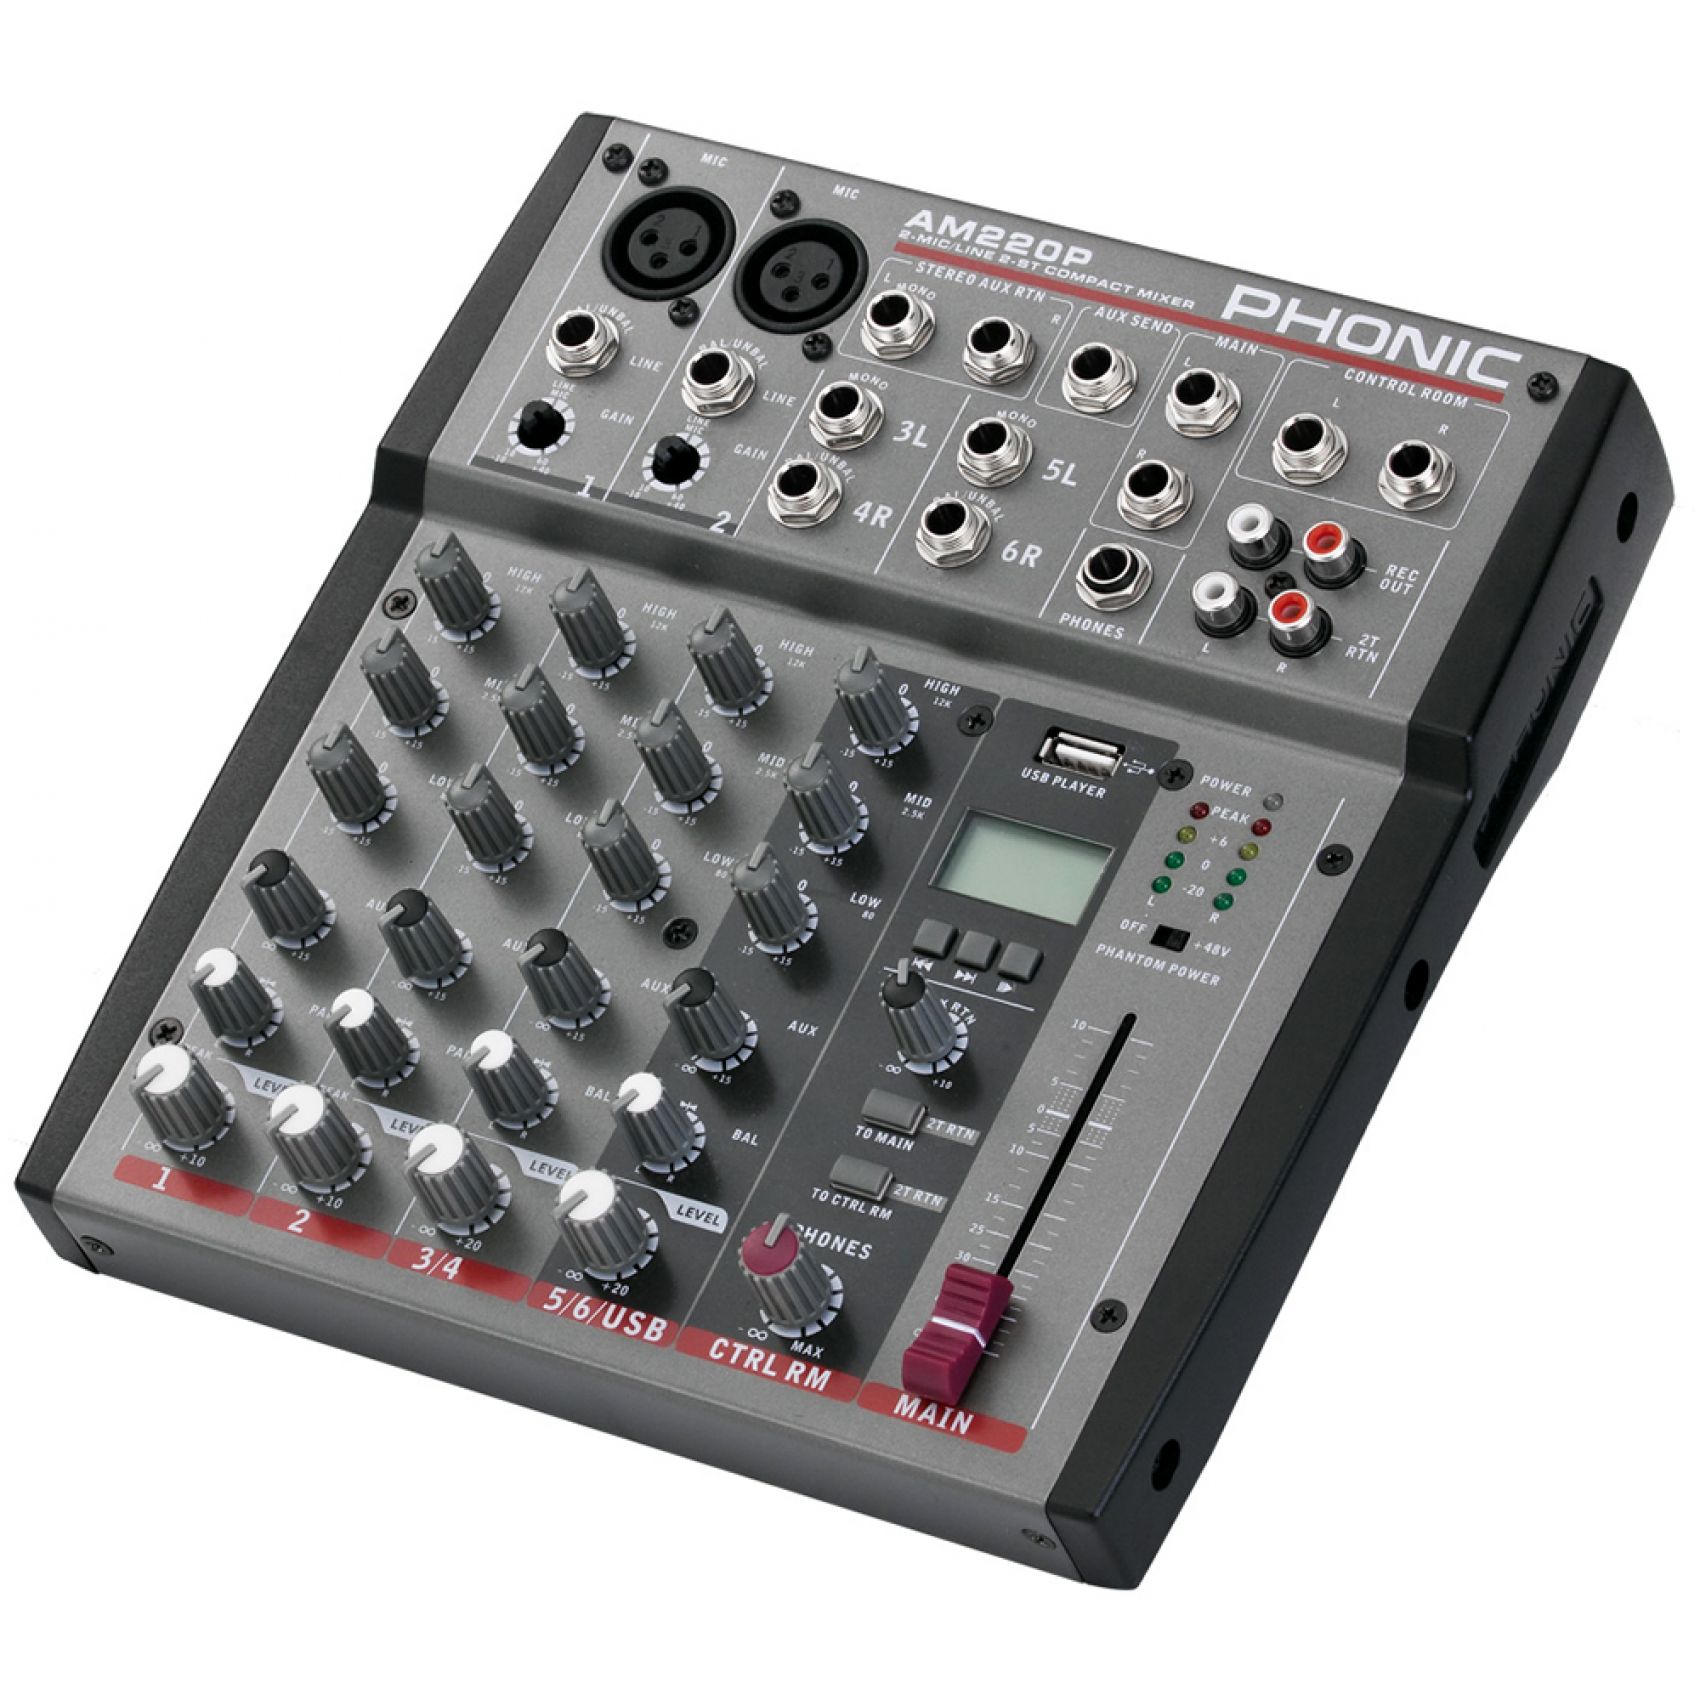 PHONIC AM220P - MIXER 4 CANALI 2 MIC/LINE 2 STEREO + USB PLAYER